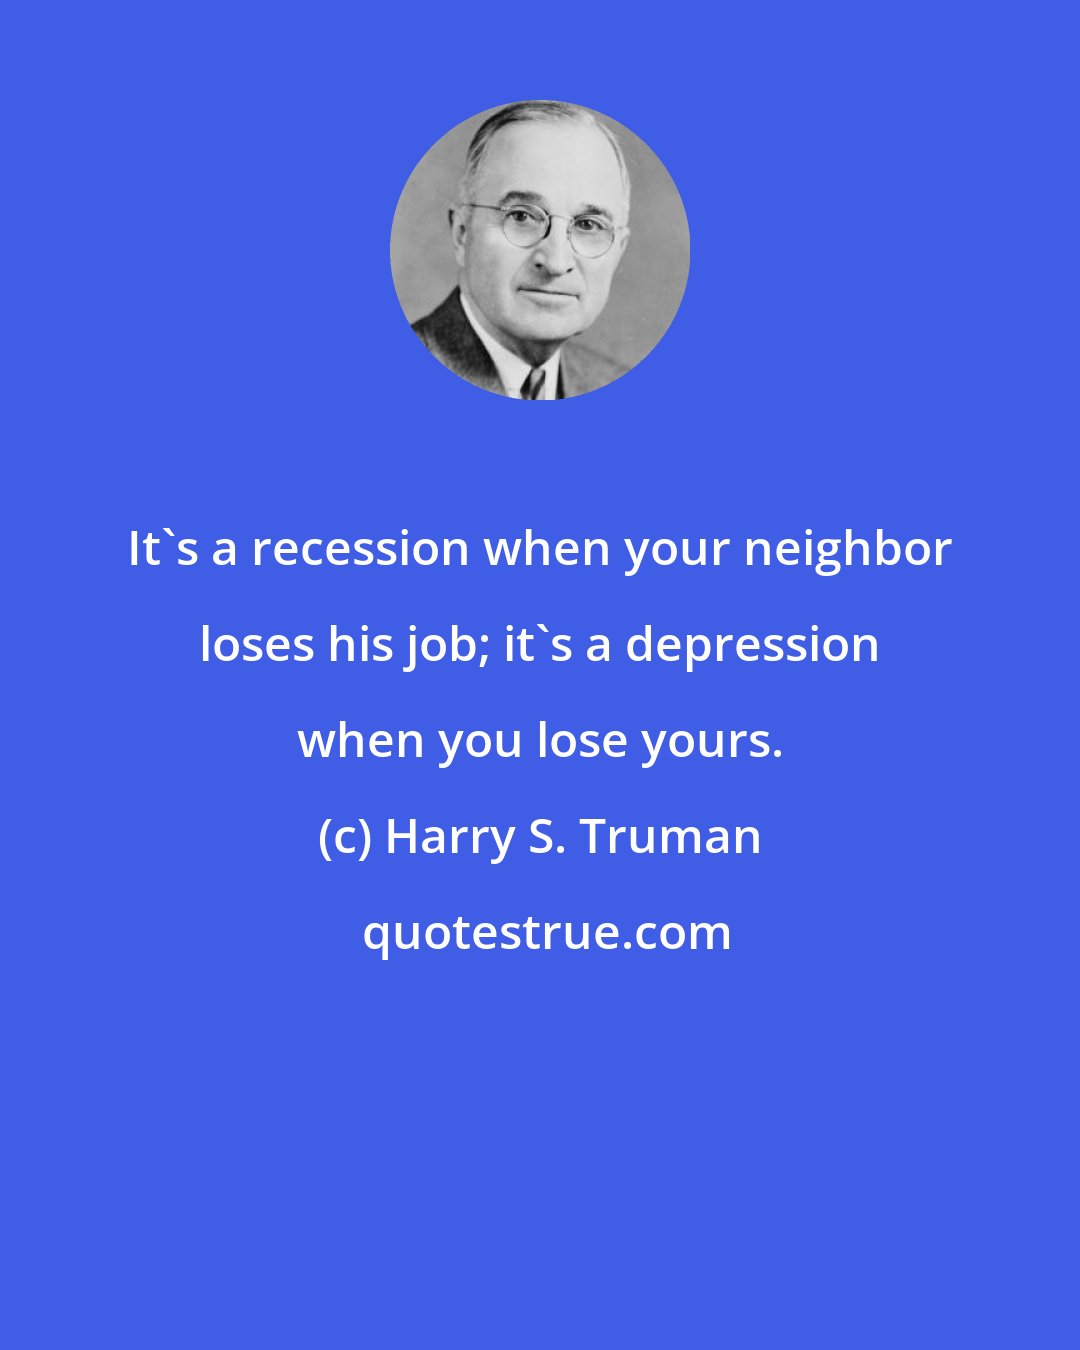 Harry S. Truman: It's a recession when your neighbor loses his job; it's a depression when you lose yours.